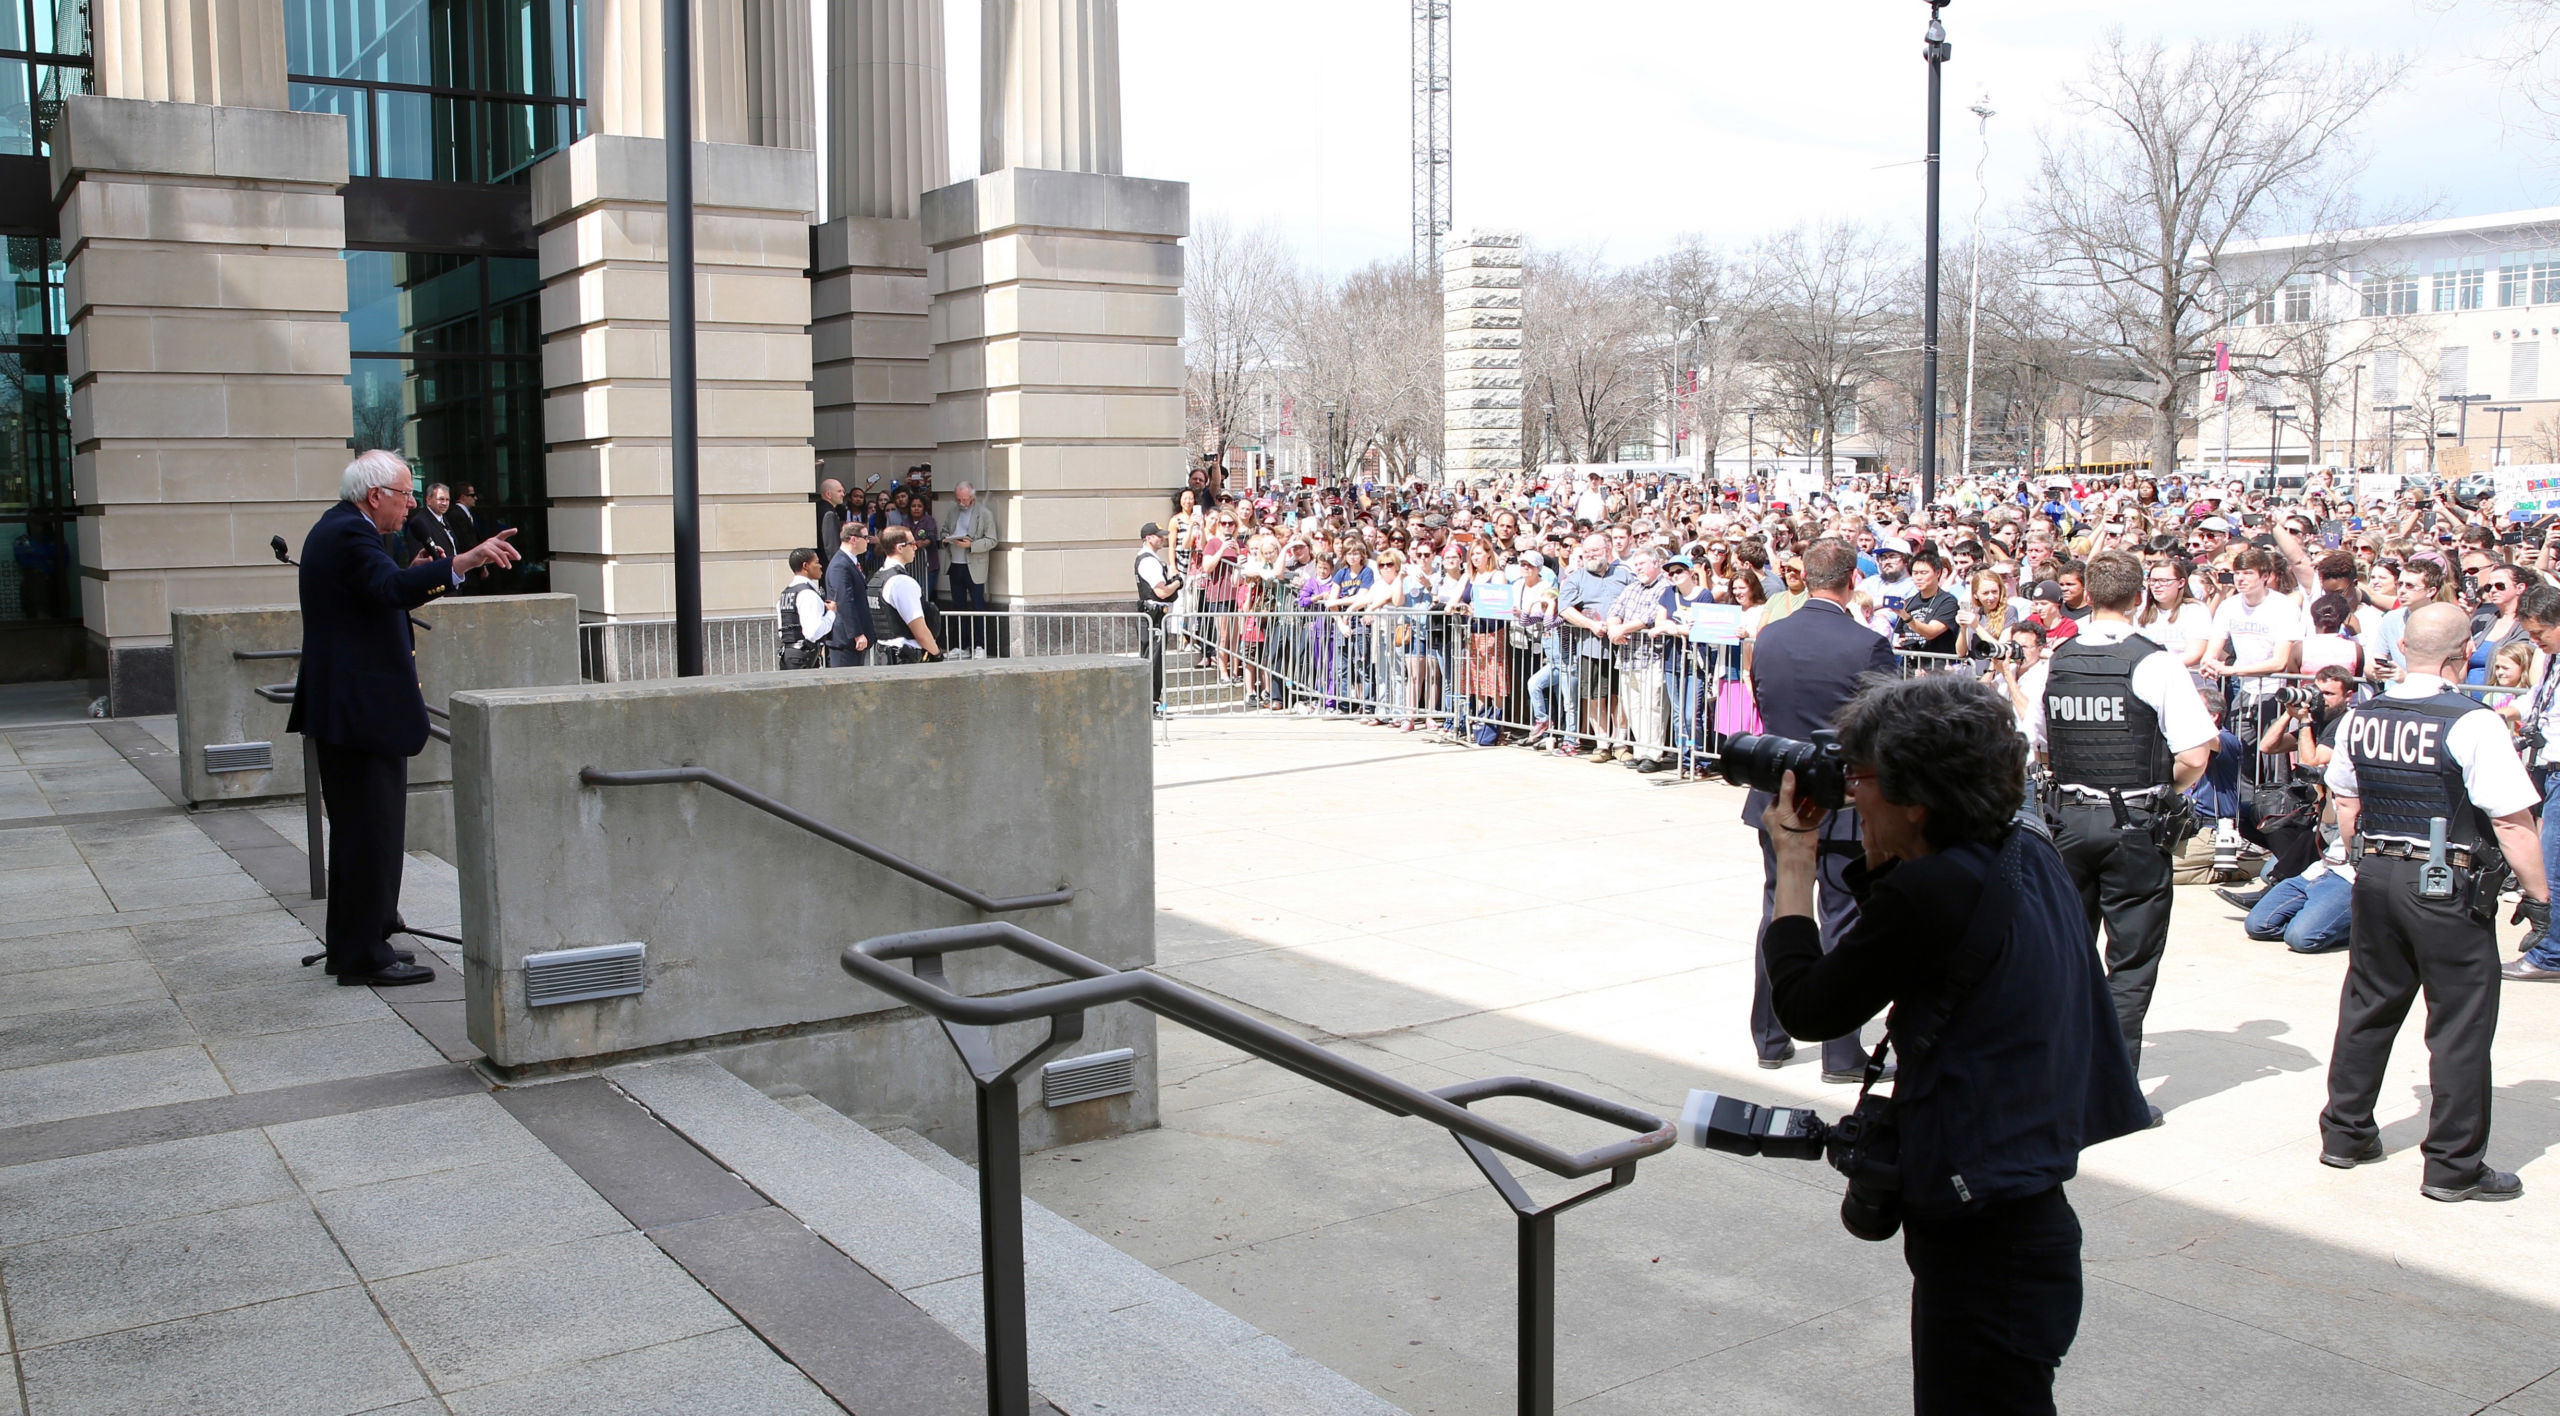 Democratic presidential candidate Bernie Sanders speaks to an overflow crowd outside Raleigh's Memorial Auditorium. (CJ Photo by Don Carrington)